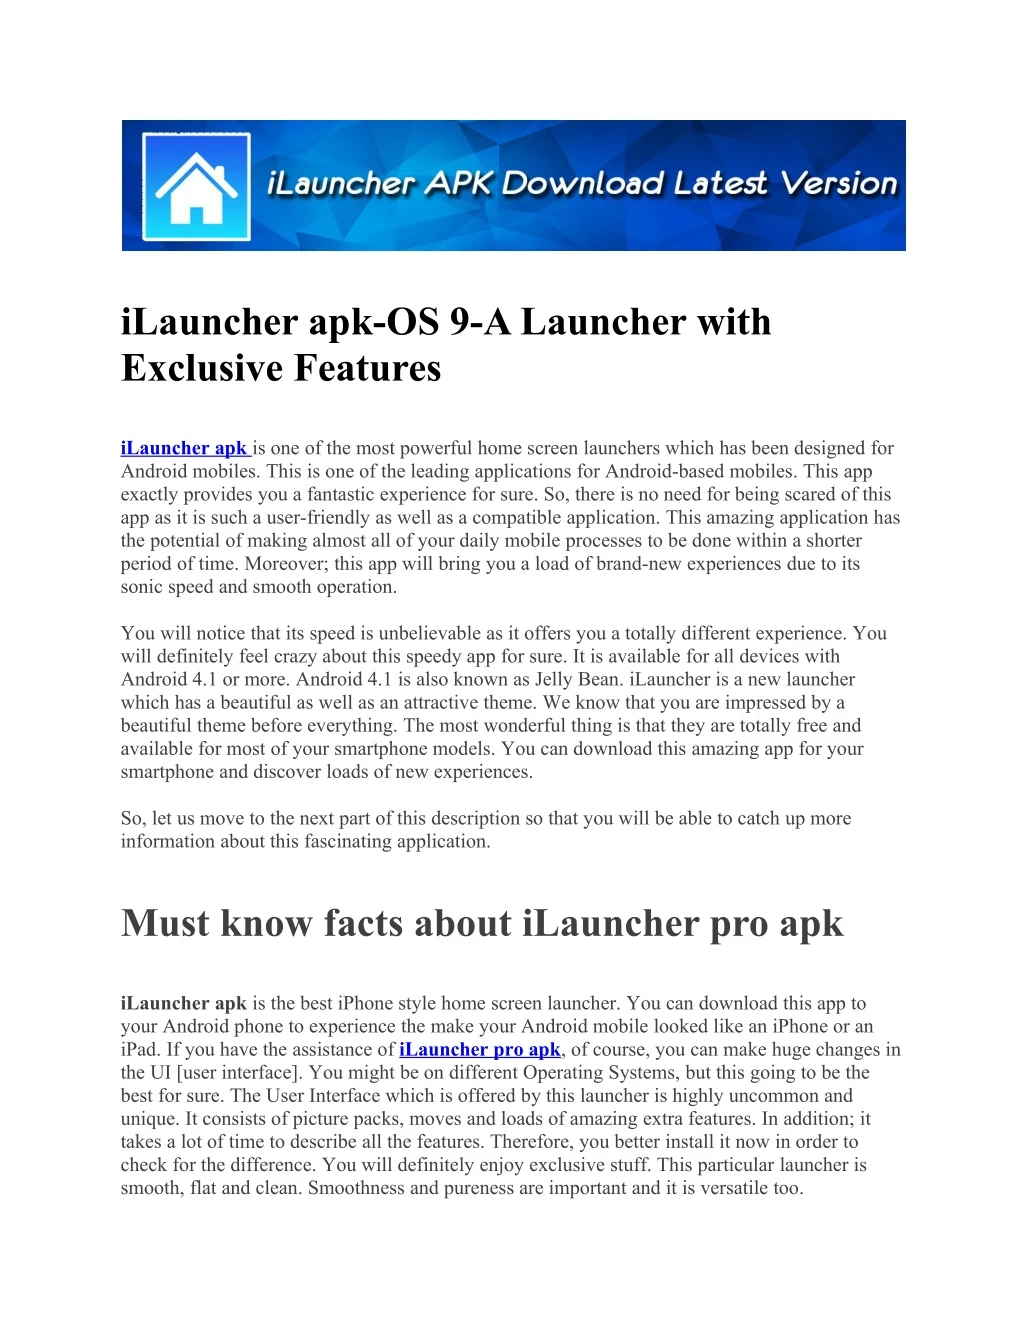 ilauncher apk os 9 a launcher with exclusive